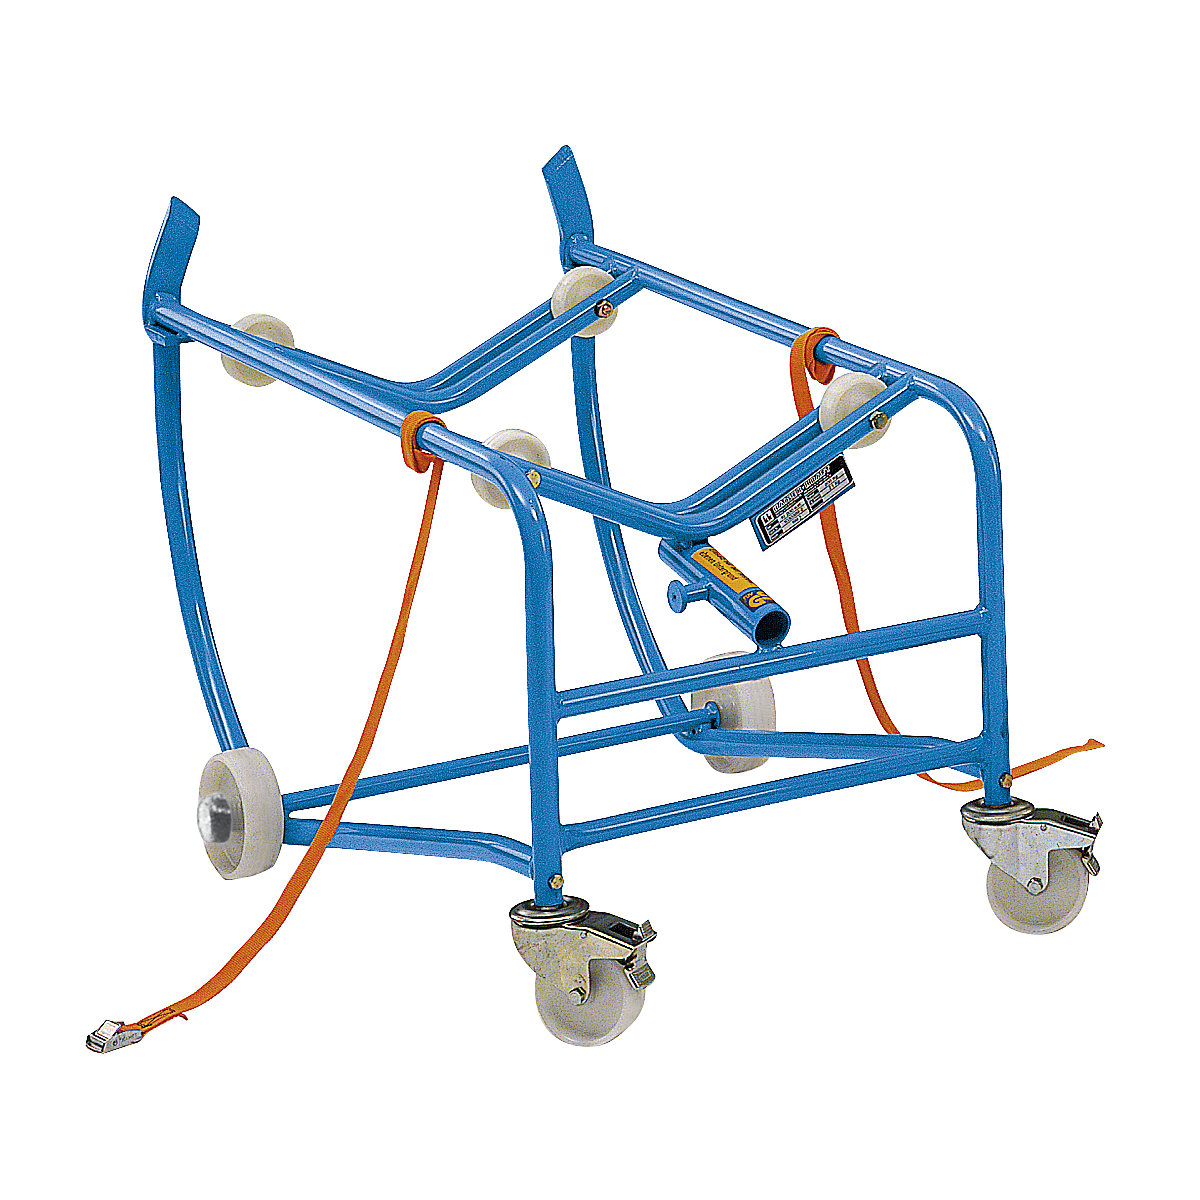 EUROKRAFTpro – Drum stand for 200 litre drum, drum support with 4 plastic rollers, without oil drip tray